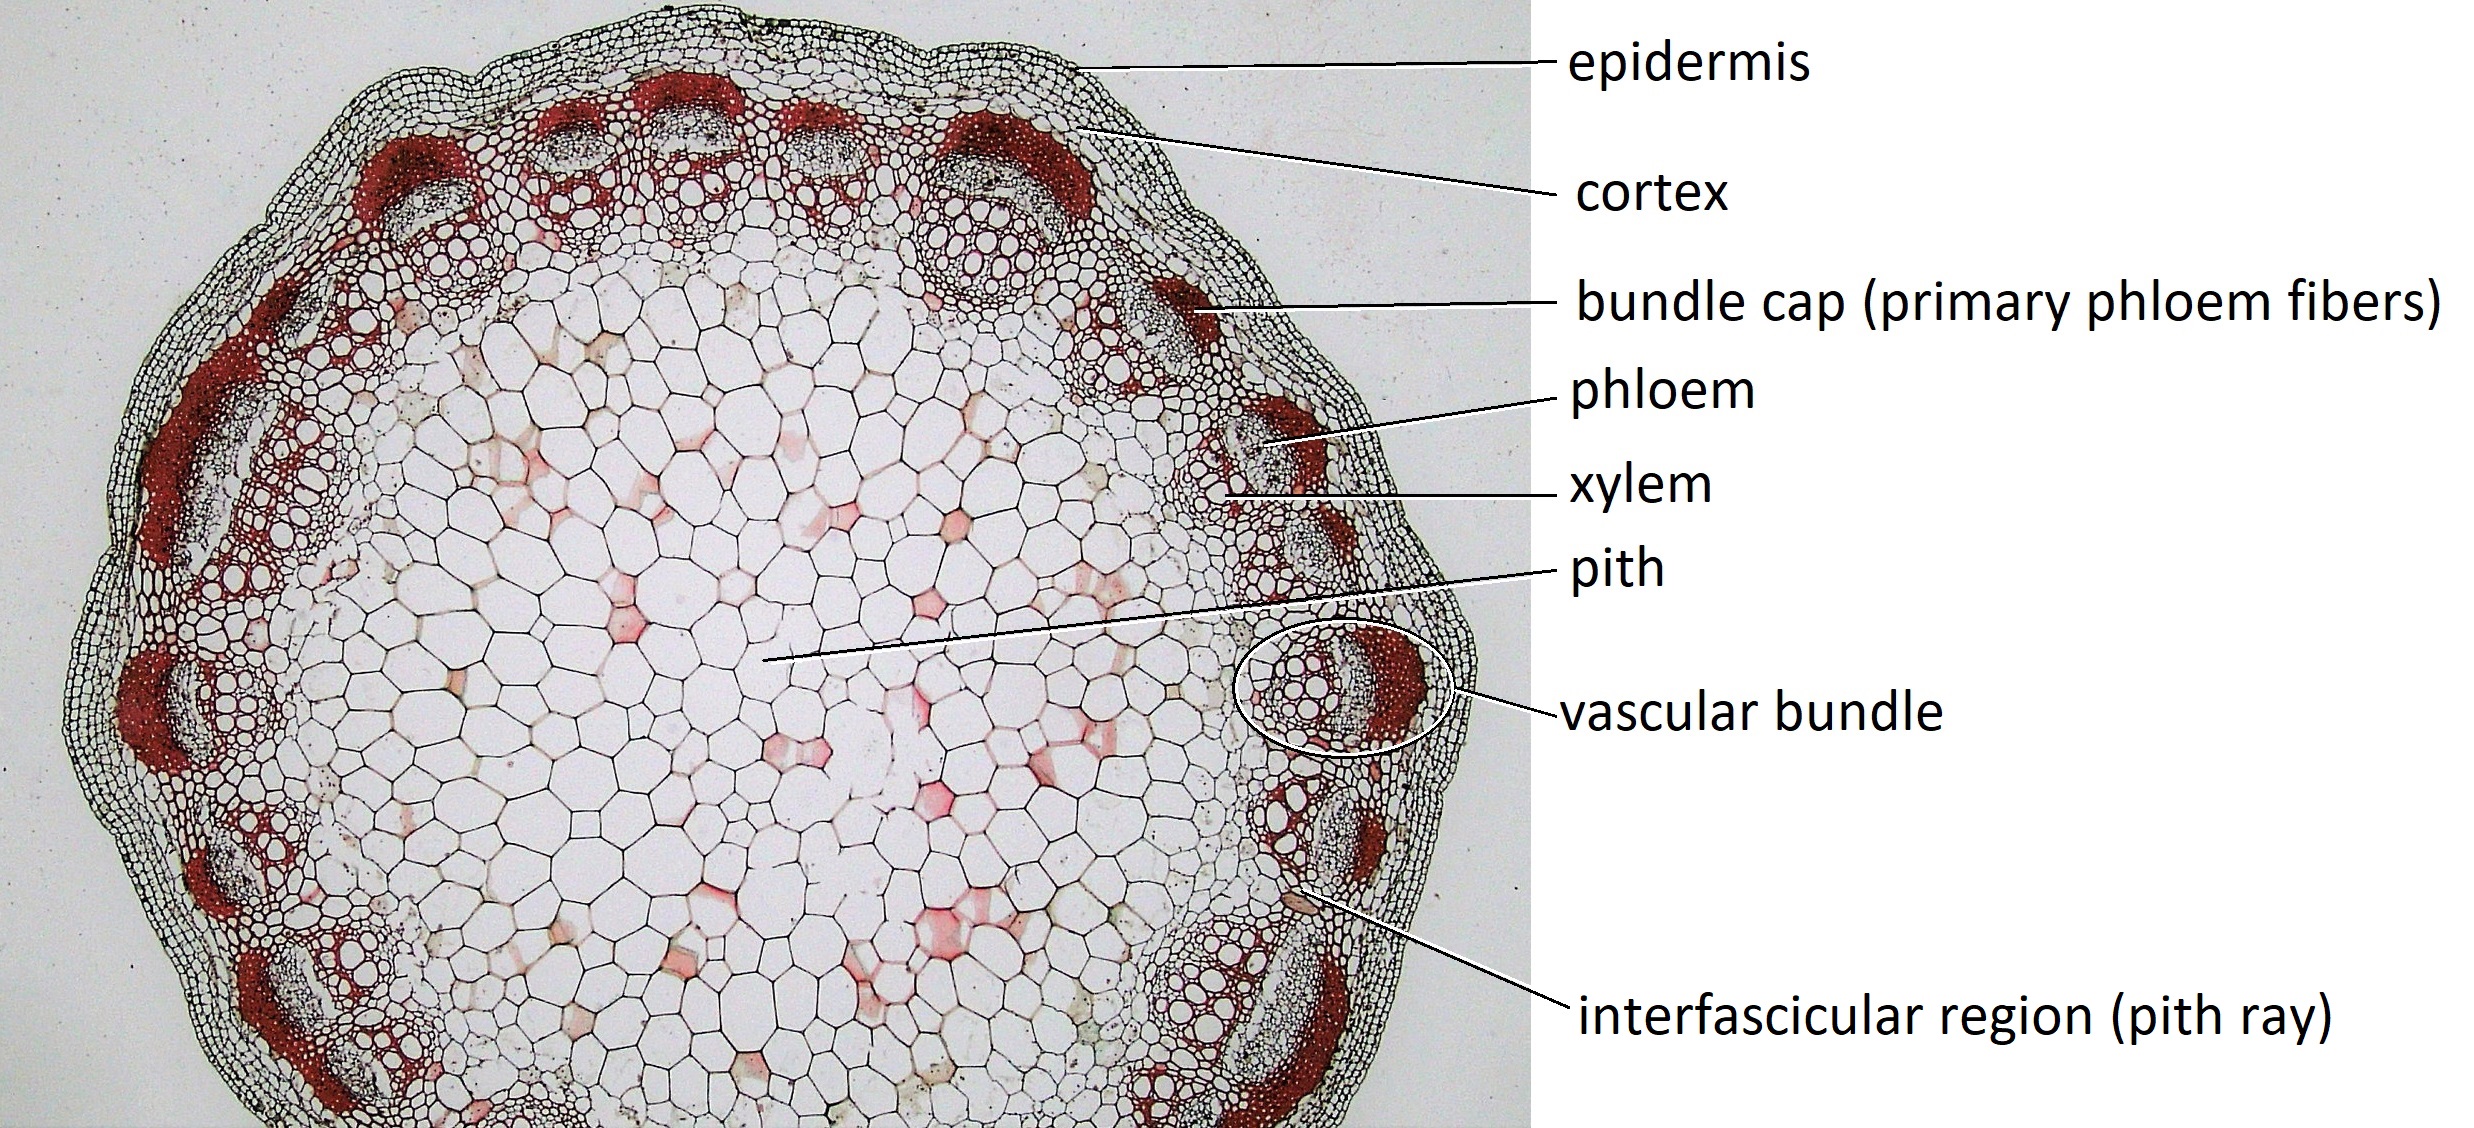 A cross section of a Helianthus stem